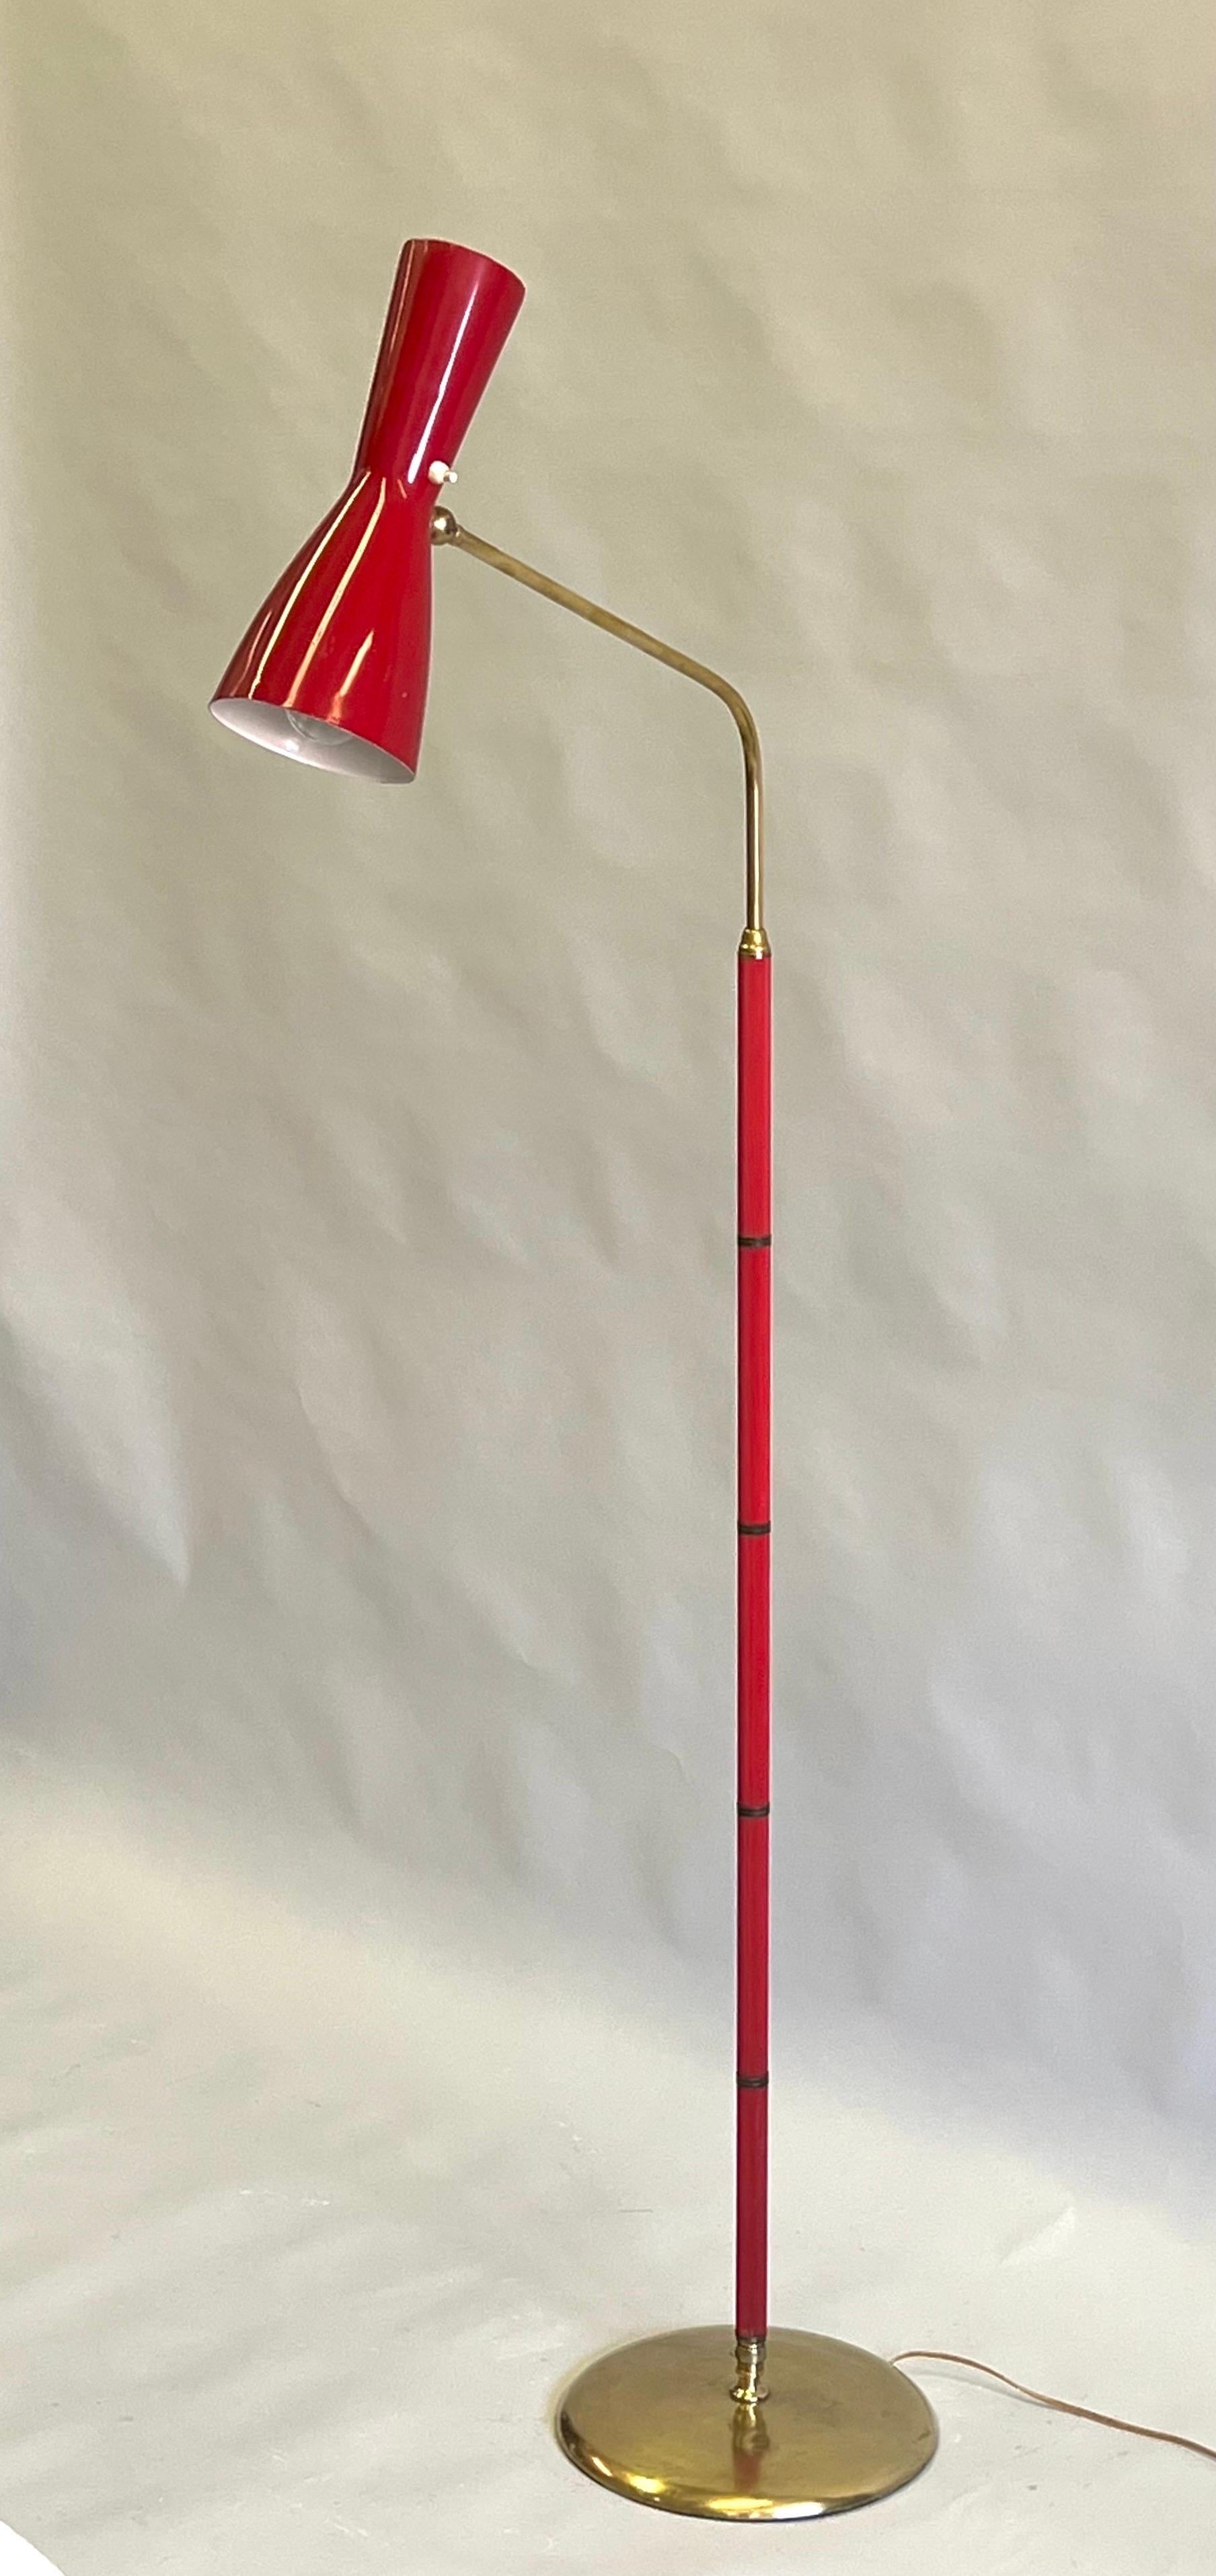 Rare Italian Midcentury Articulating Floor Lamp in Red Enameled Metal, Synthetic Red Rubber and Brass attributed to Vittoriano Vigano for the design firm of Arteluce. This is a functional and dramatic work of Italian engineering with original design